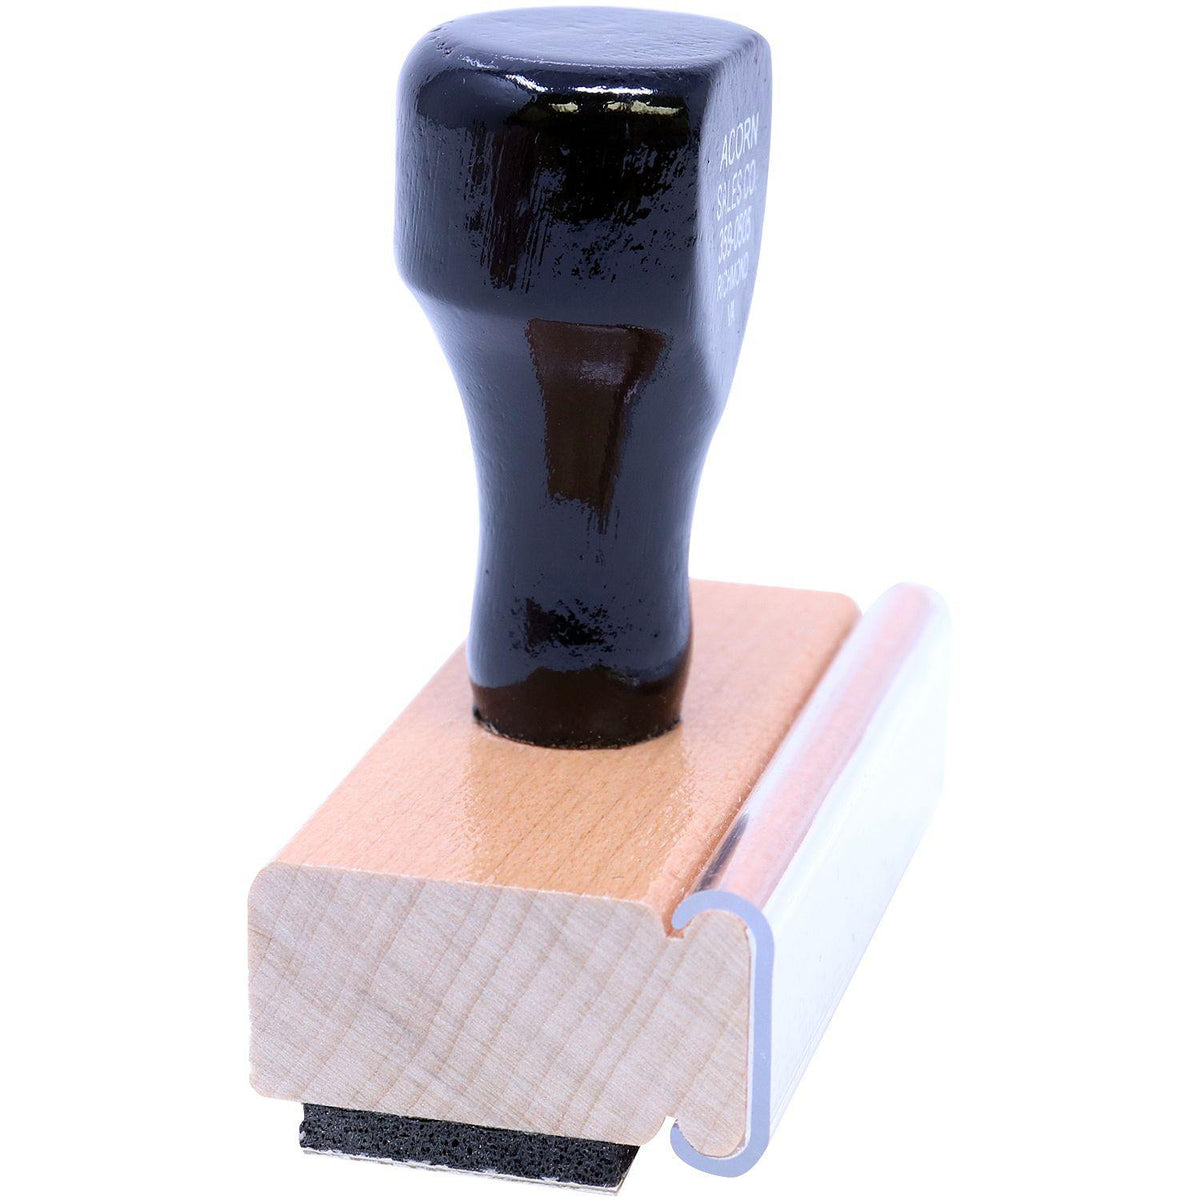 Late with Border Rubber Stamp - Engineer Seal Stamps - Brand_Acorn, Impression Size_Small, Stamp Type_Regular Stamp, Type of Use_General, Type of Use_Teacher